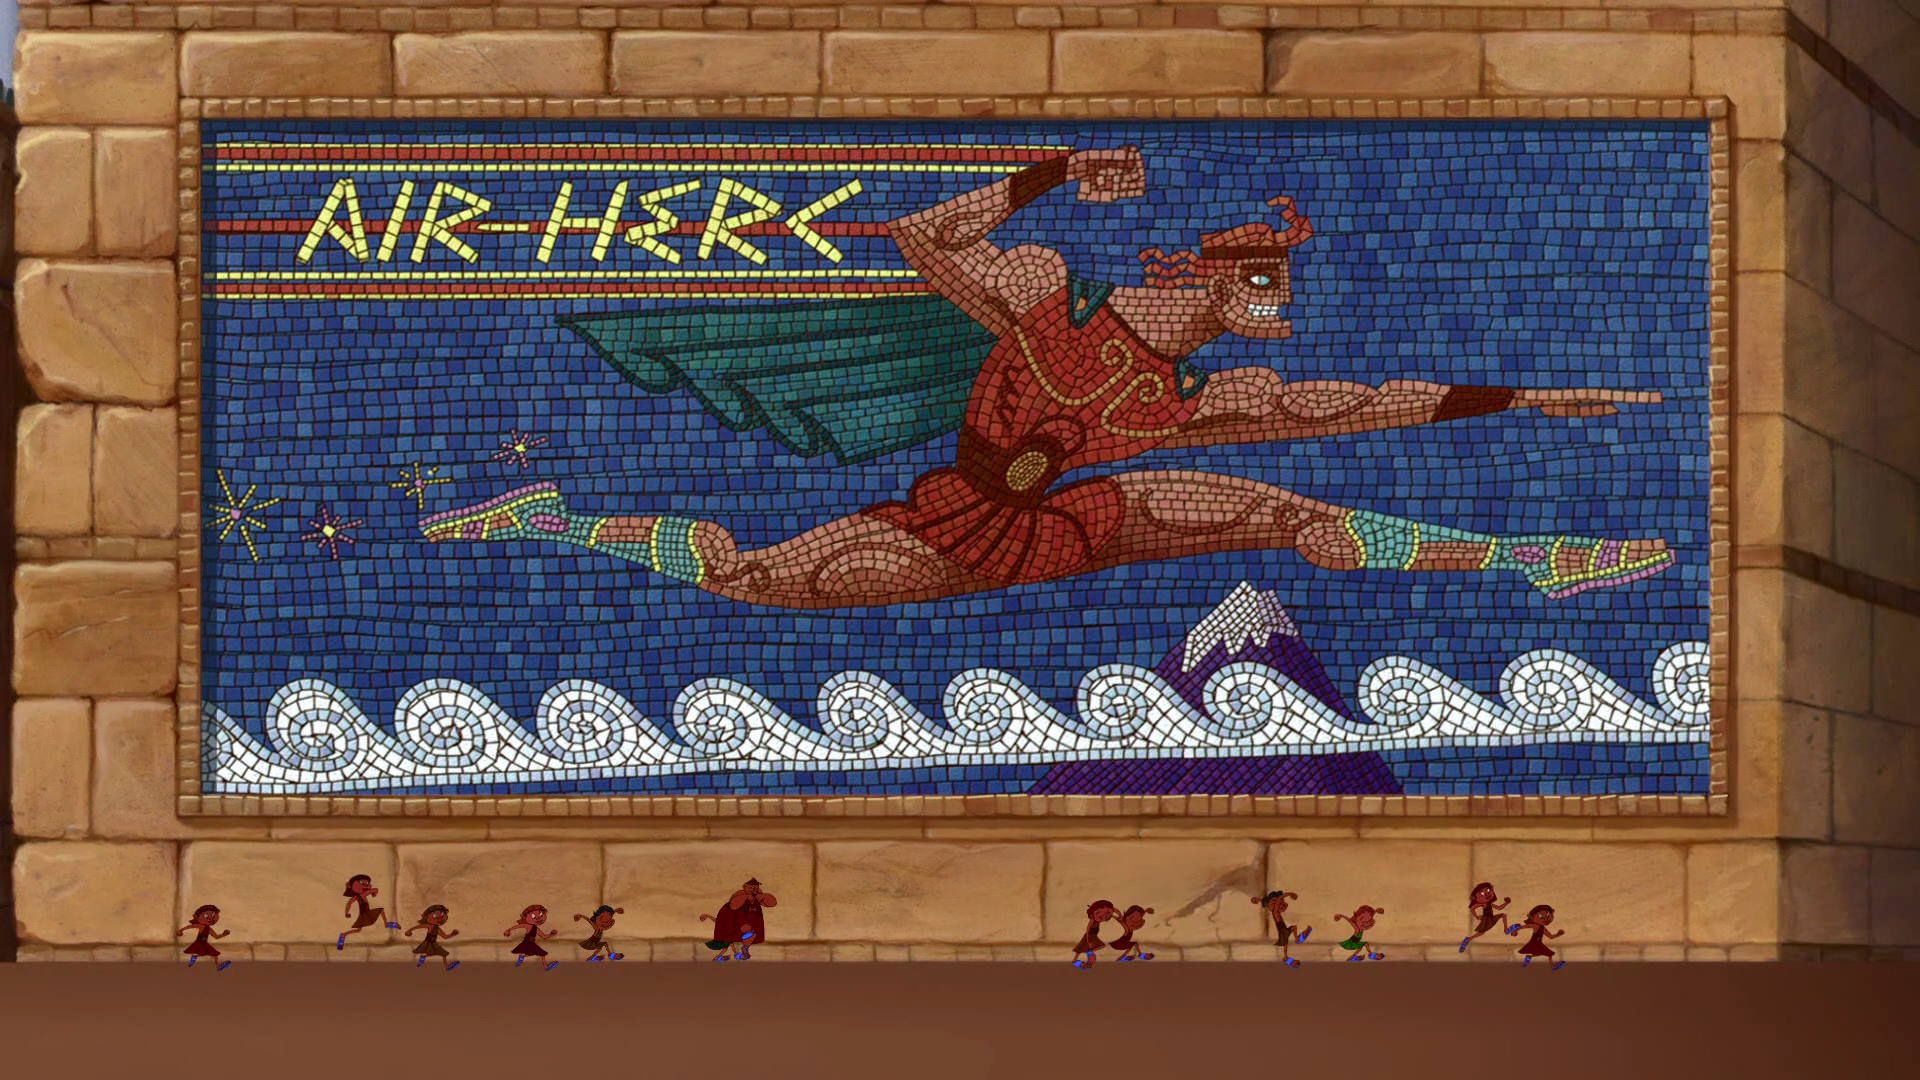 Hercules is depicted jumping in a mosaic advertisement for Air-Hercs